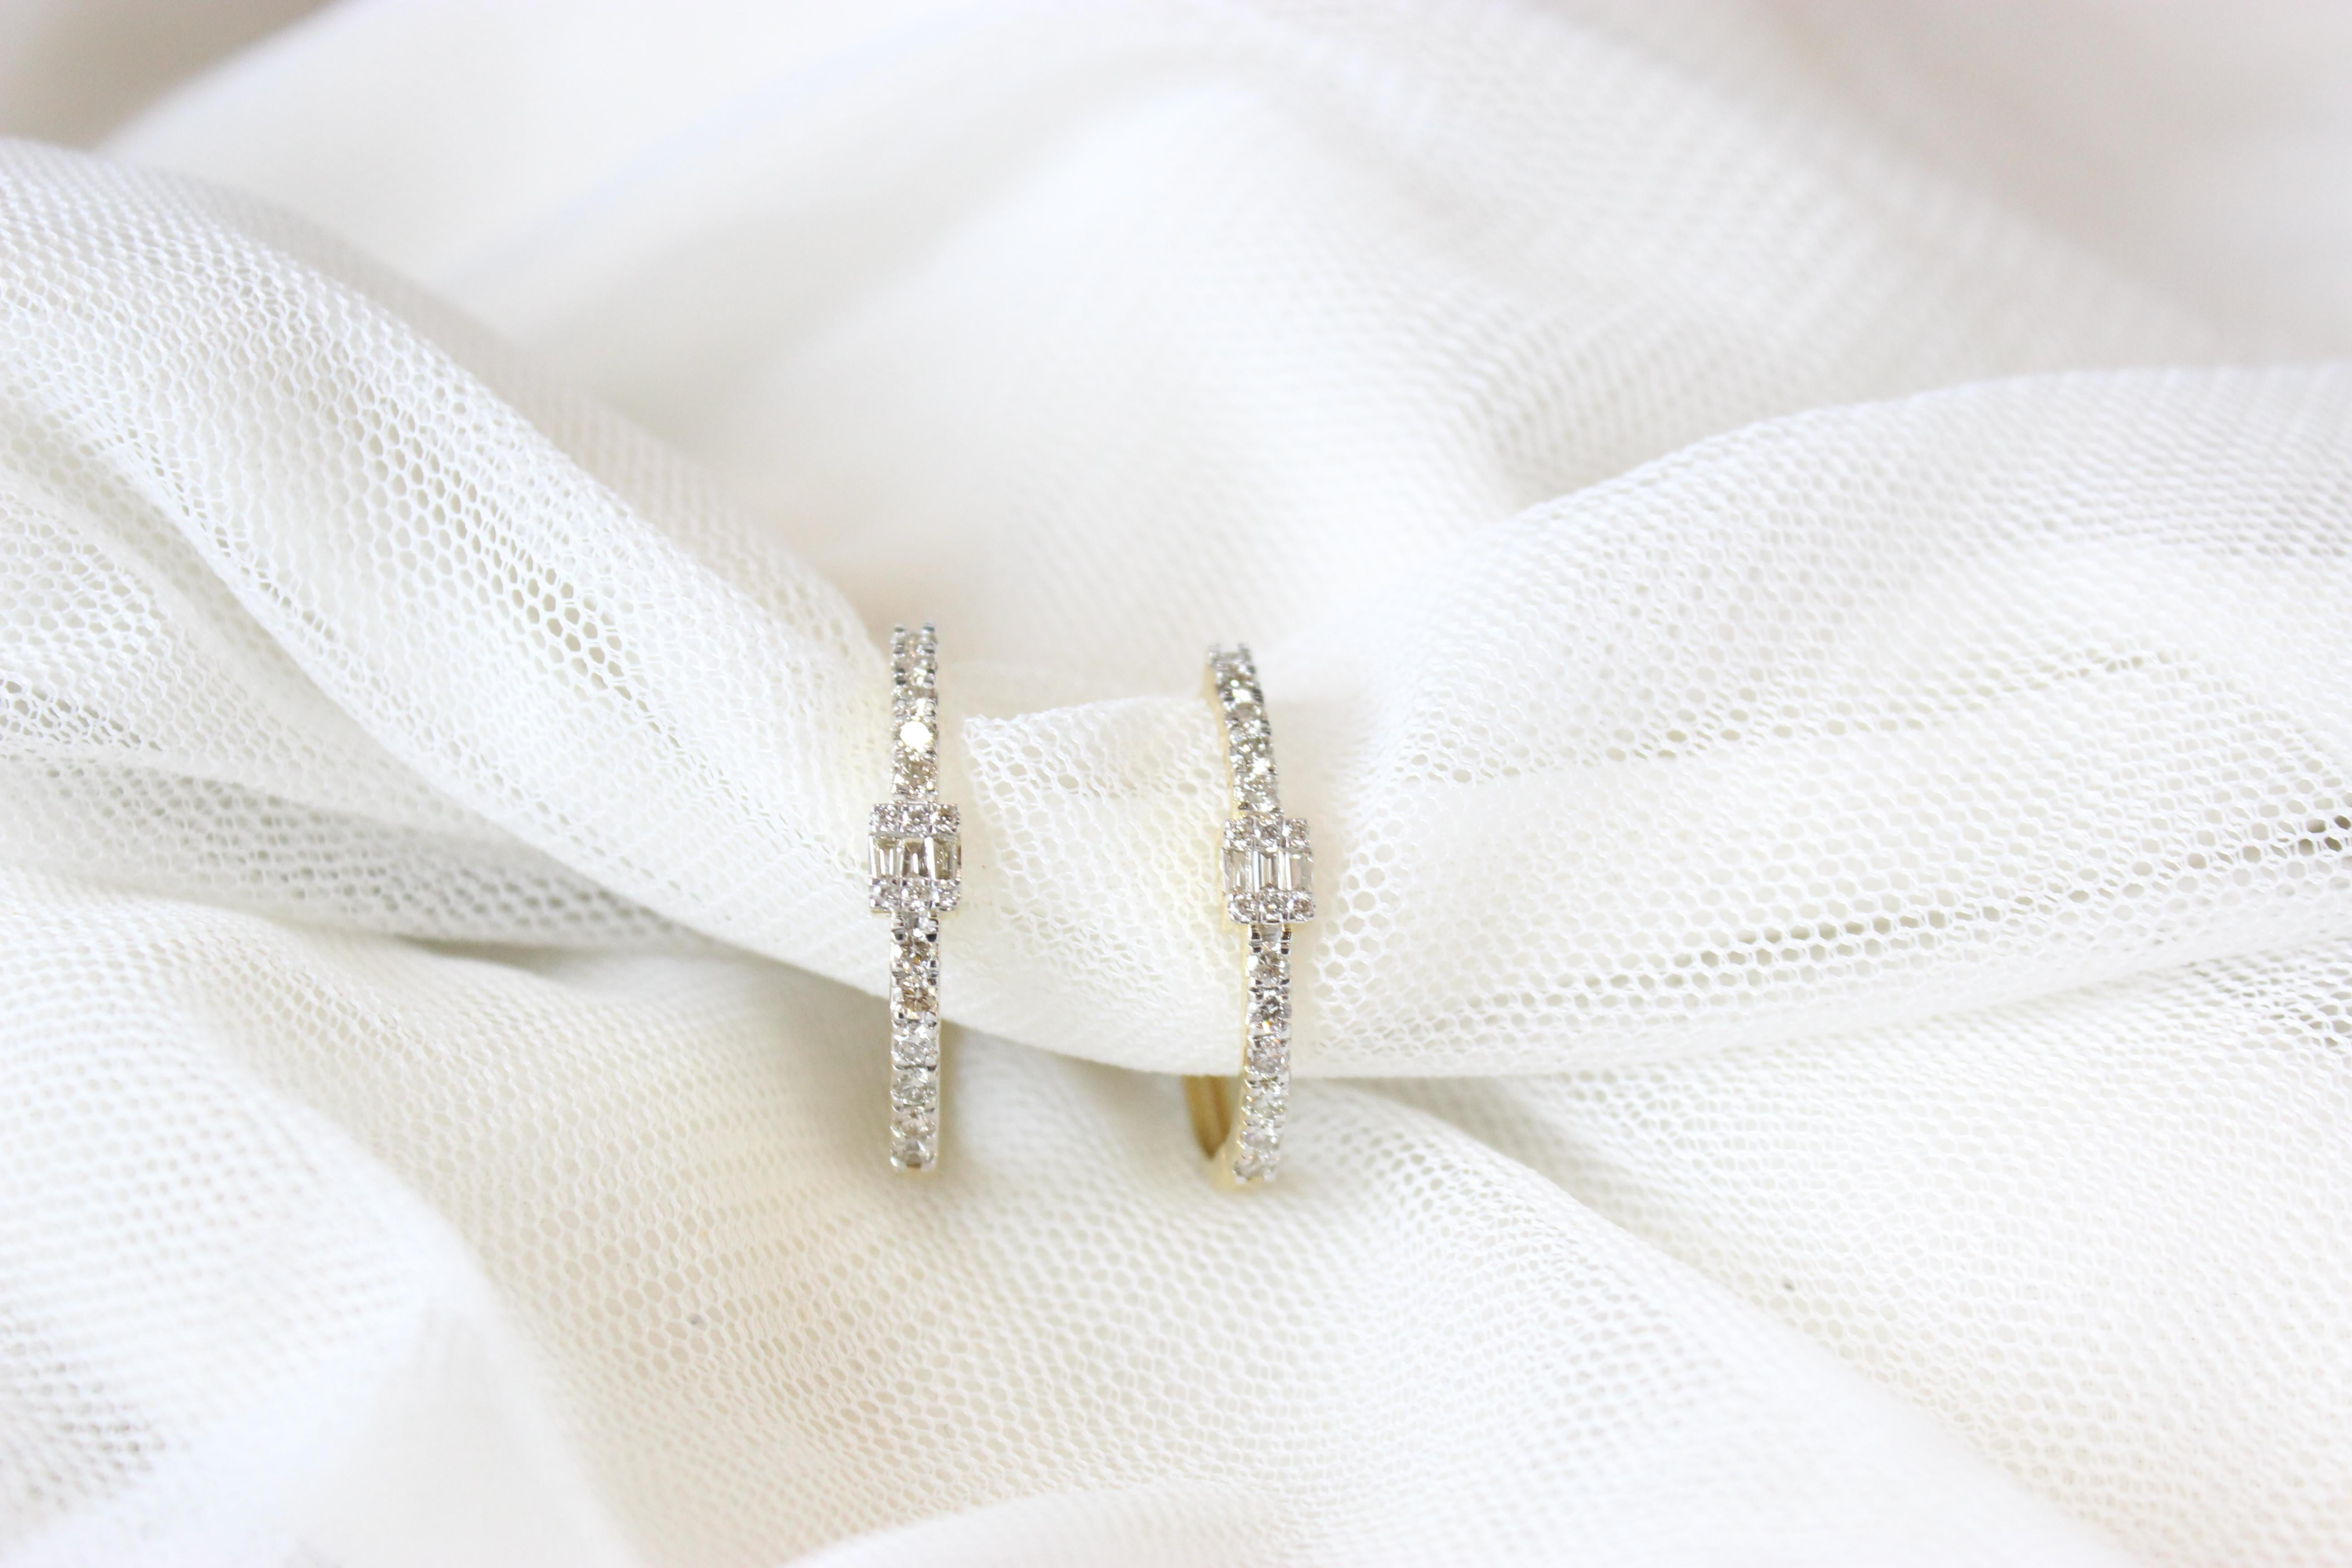 This exquisite hoop earrings are a stunning example of timeless elegance and modern sophistication. Crafted from lustrous 18K solid gold, their oval shape provides a unique twist on the classic round hoop design. The hoops are adorned with a